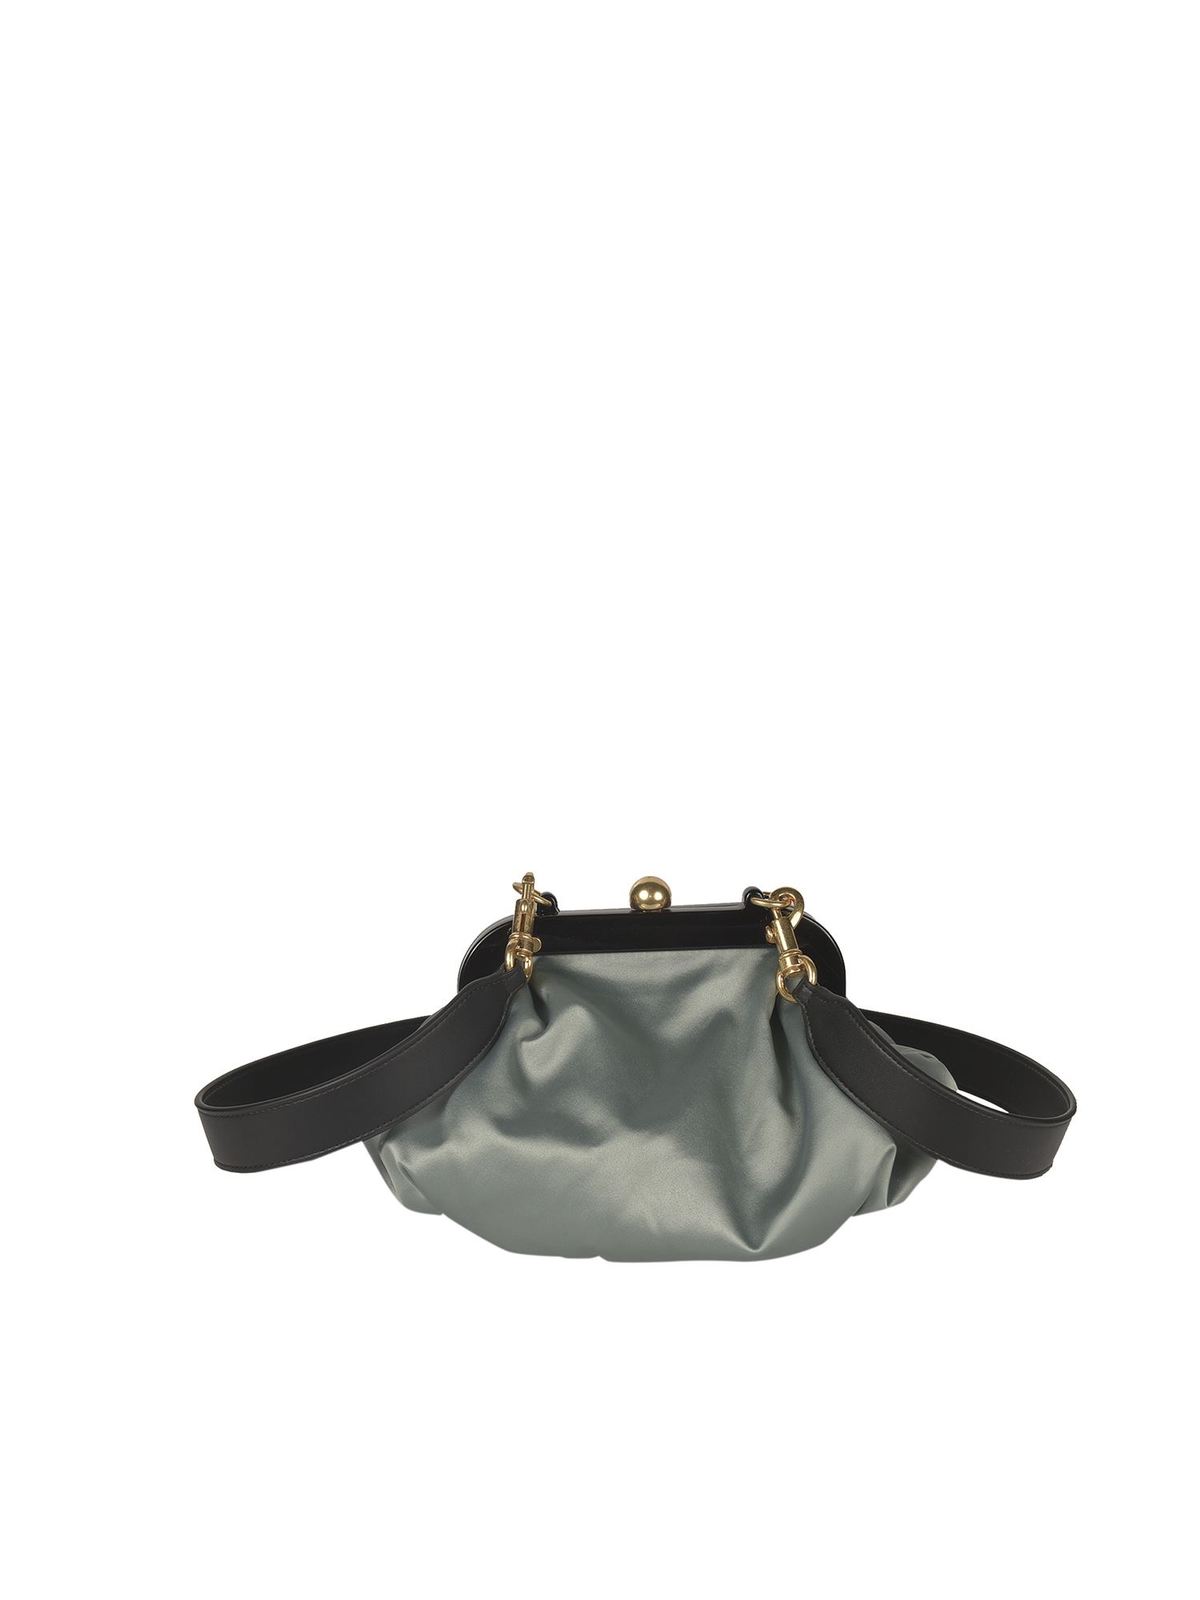 SEE BY CHLOÉ TILLY SMALL CLUTCH BAG IN MISTY FOREST colour